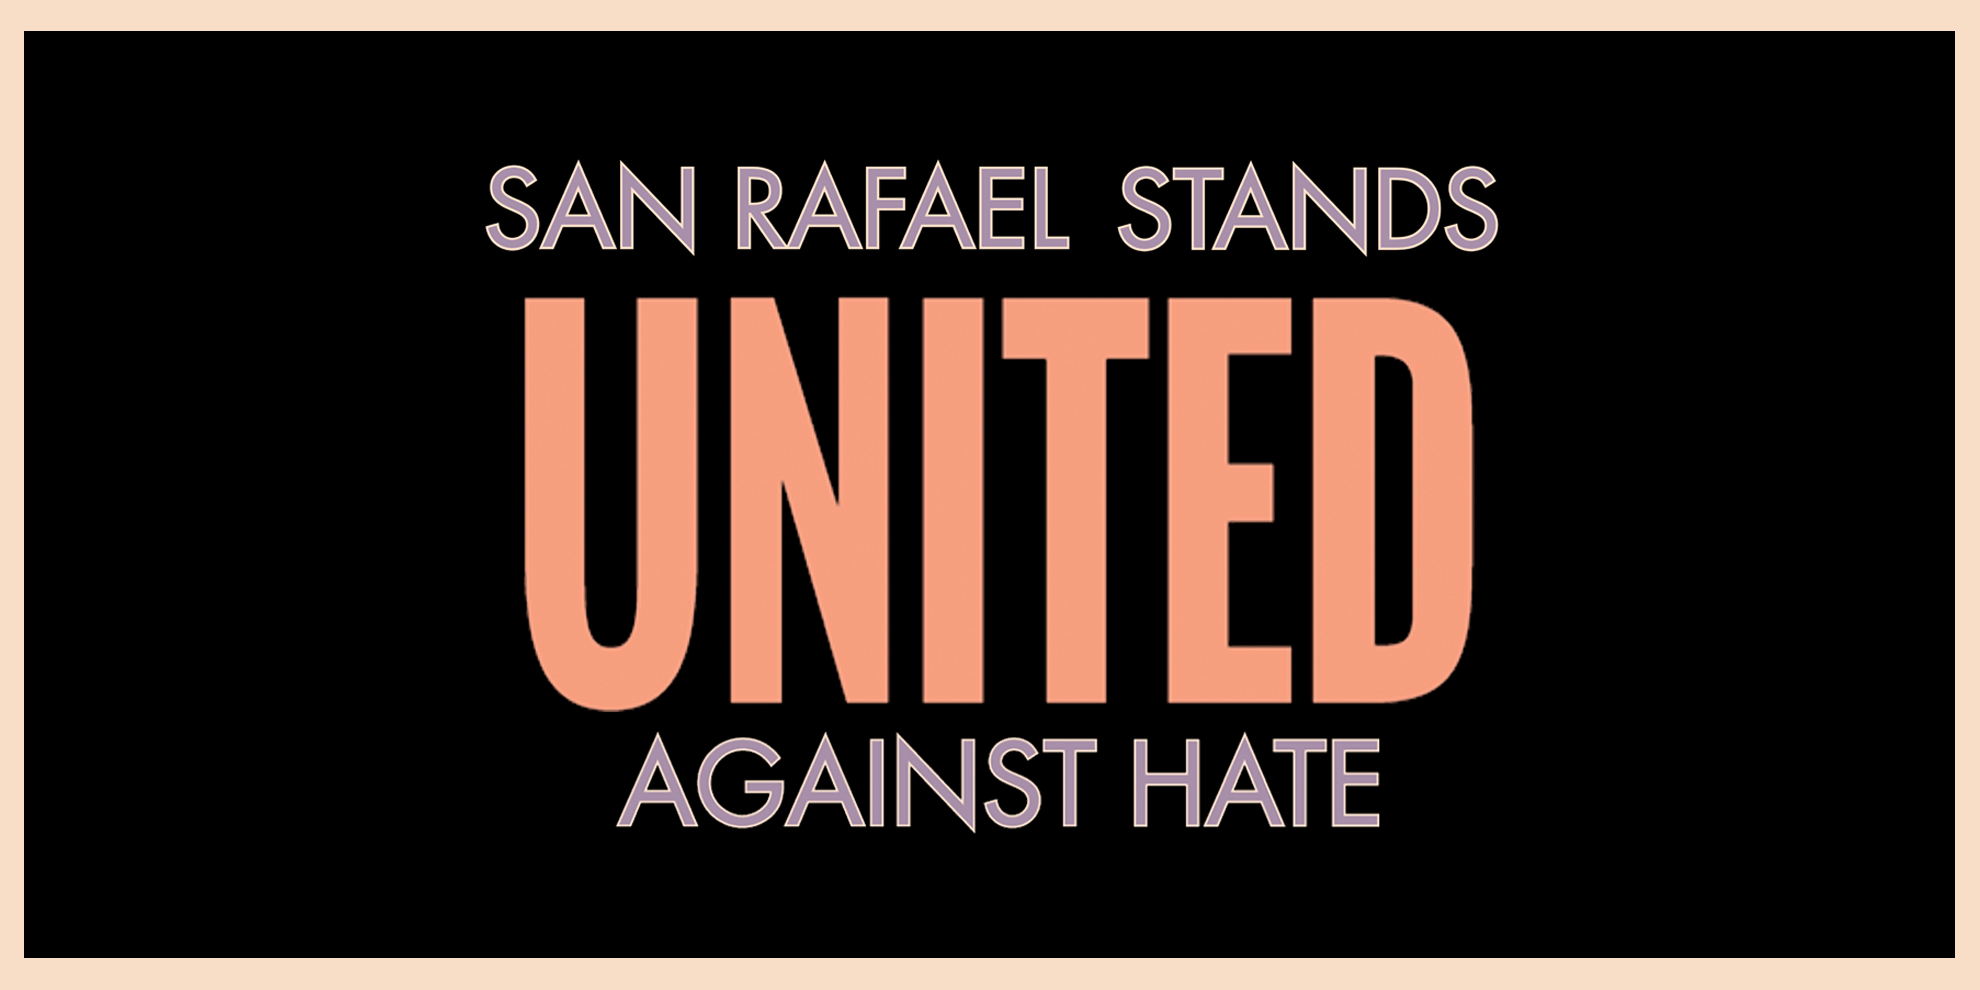 San Rafael Stands United Against Hate